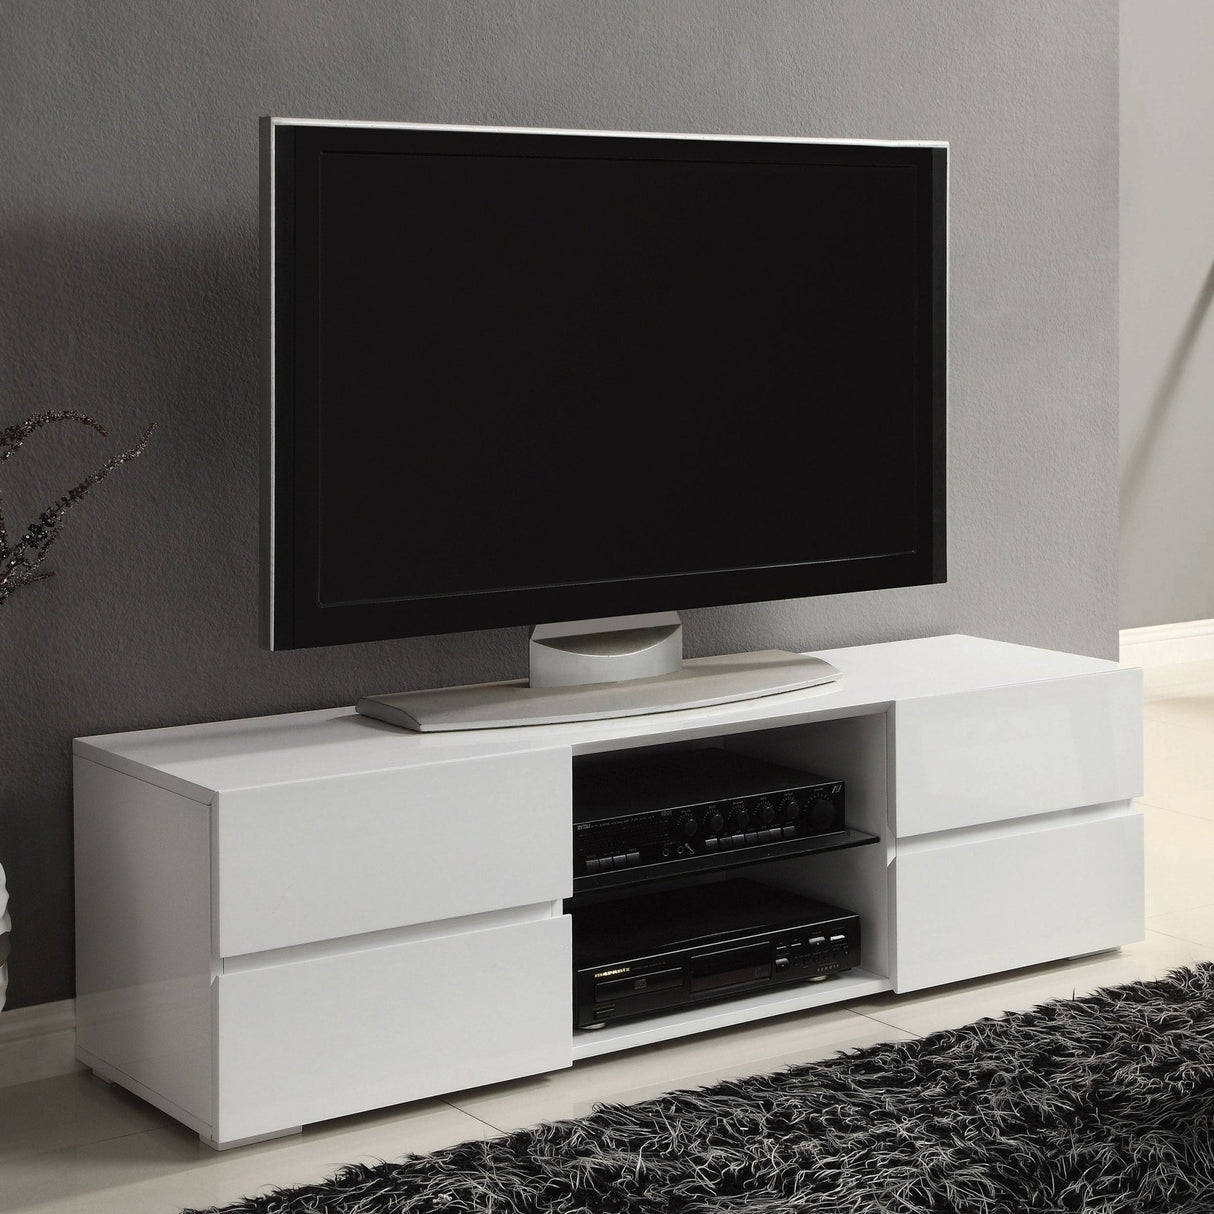 55" Tv Stand - Galvin 4-drawer TV Console Glossy White